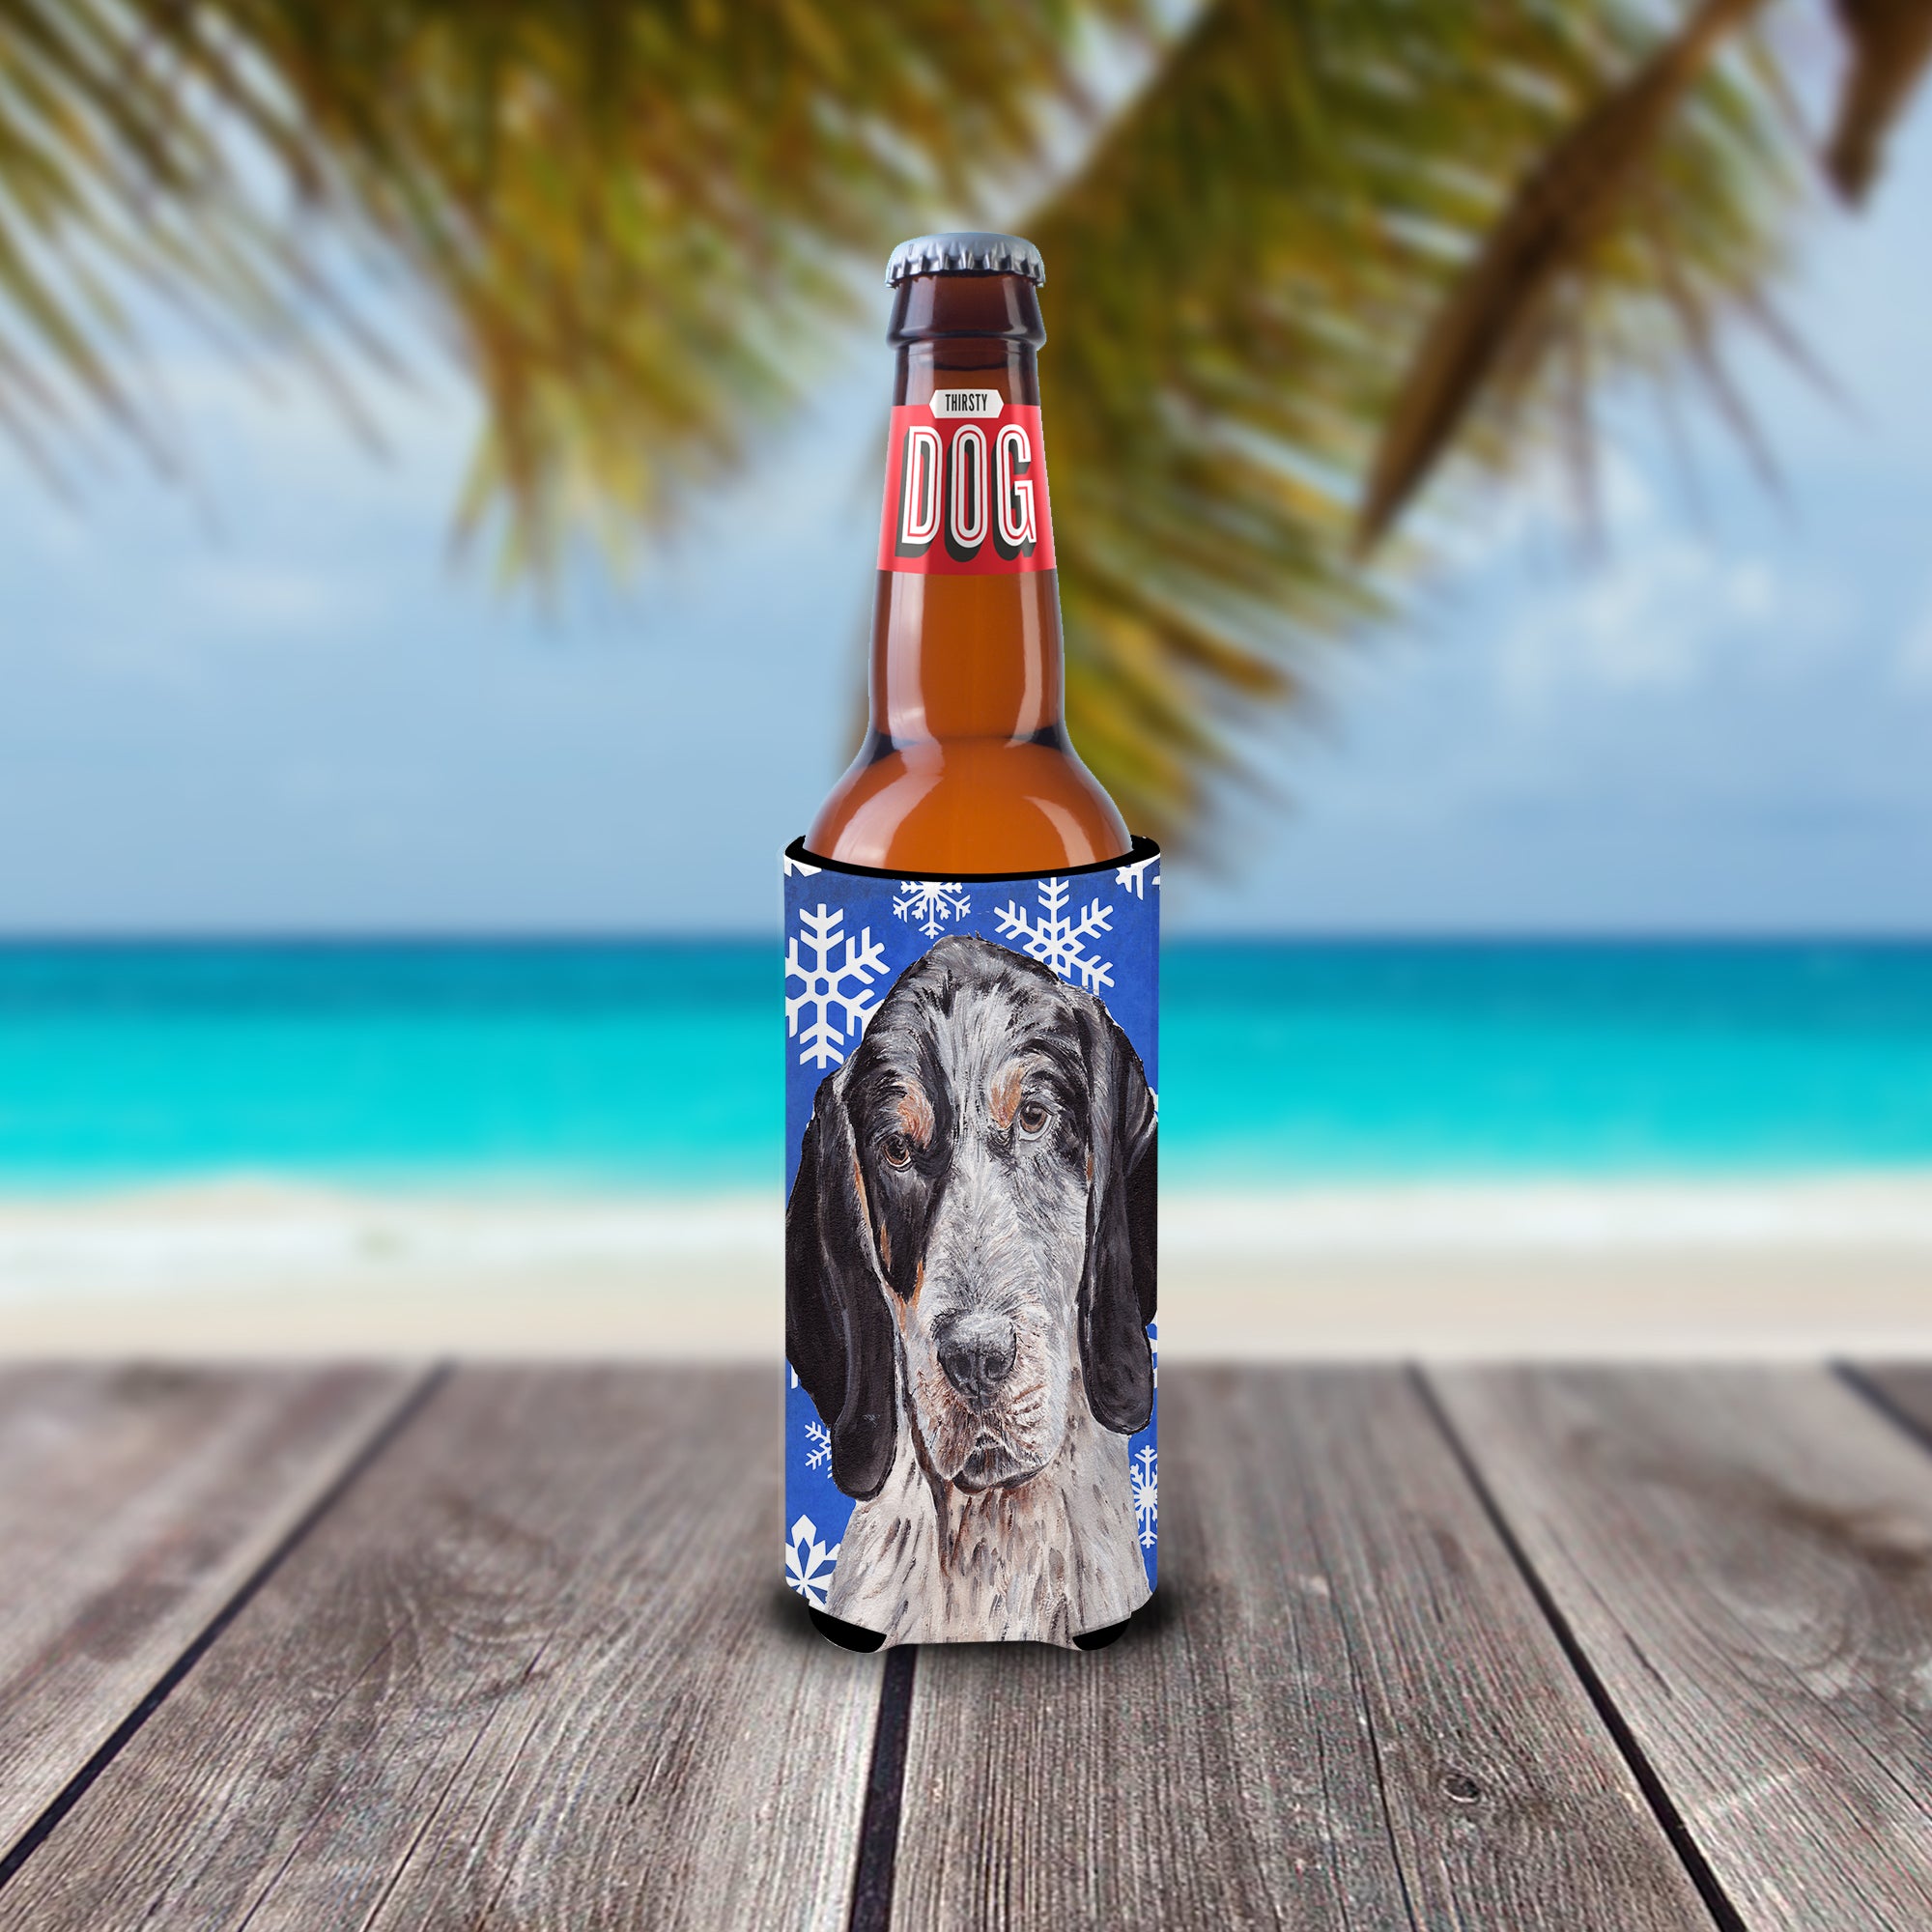 Blue Tick Coonhound Winter Snowflakes Ultra Beverage Insulators for slim cans SC9769MUK.